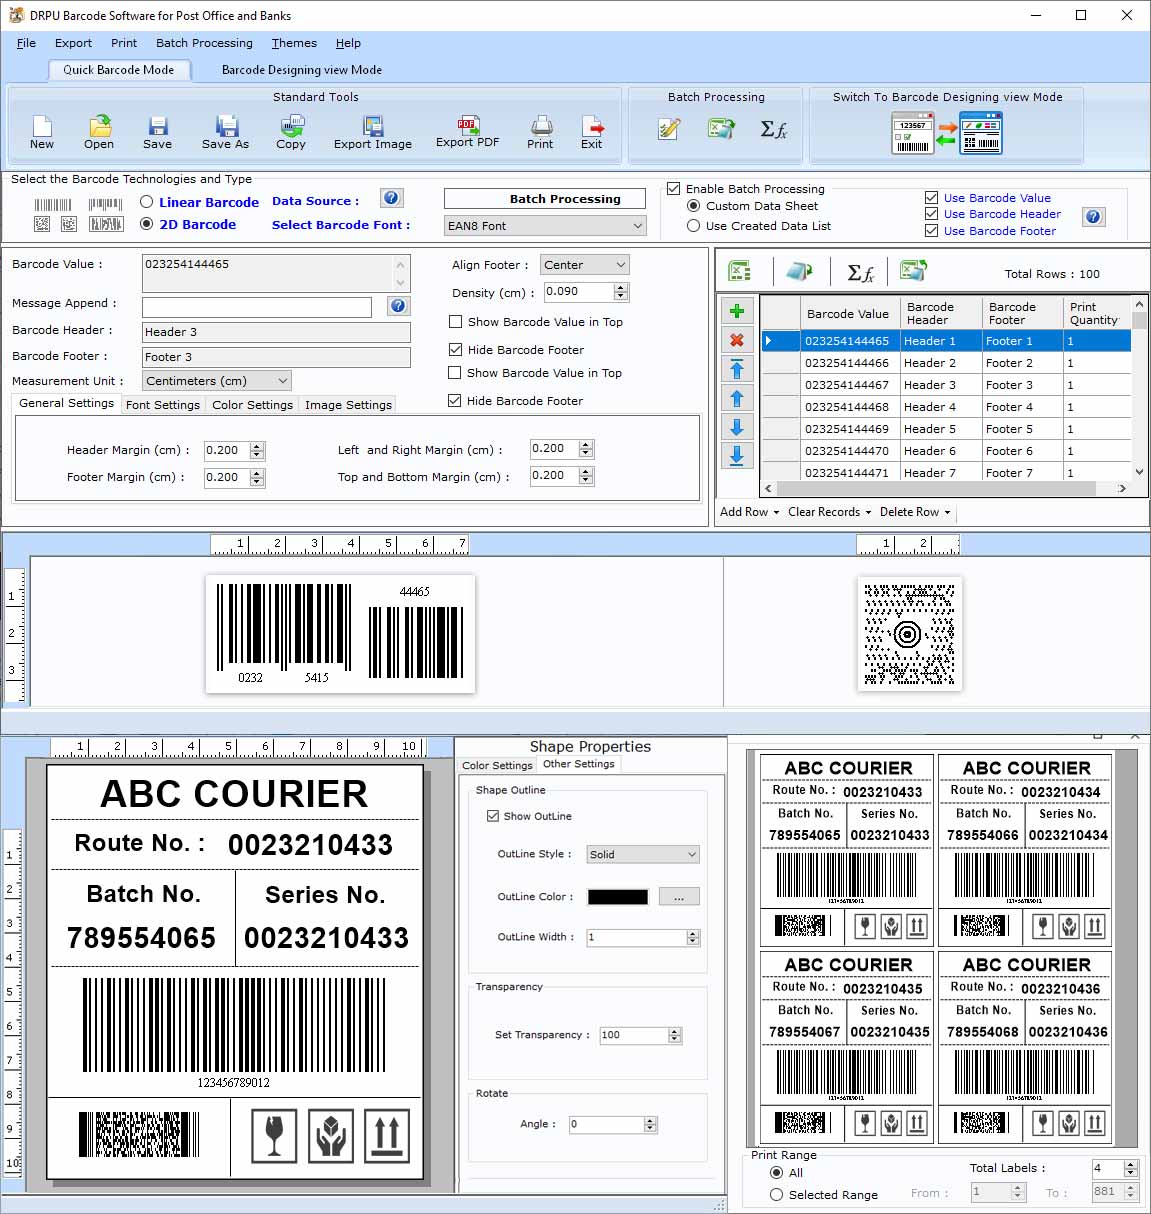 Screenshot of Barcode Inventory System 7.3.0.1